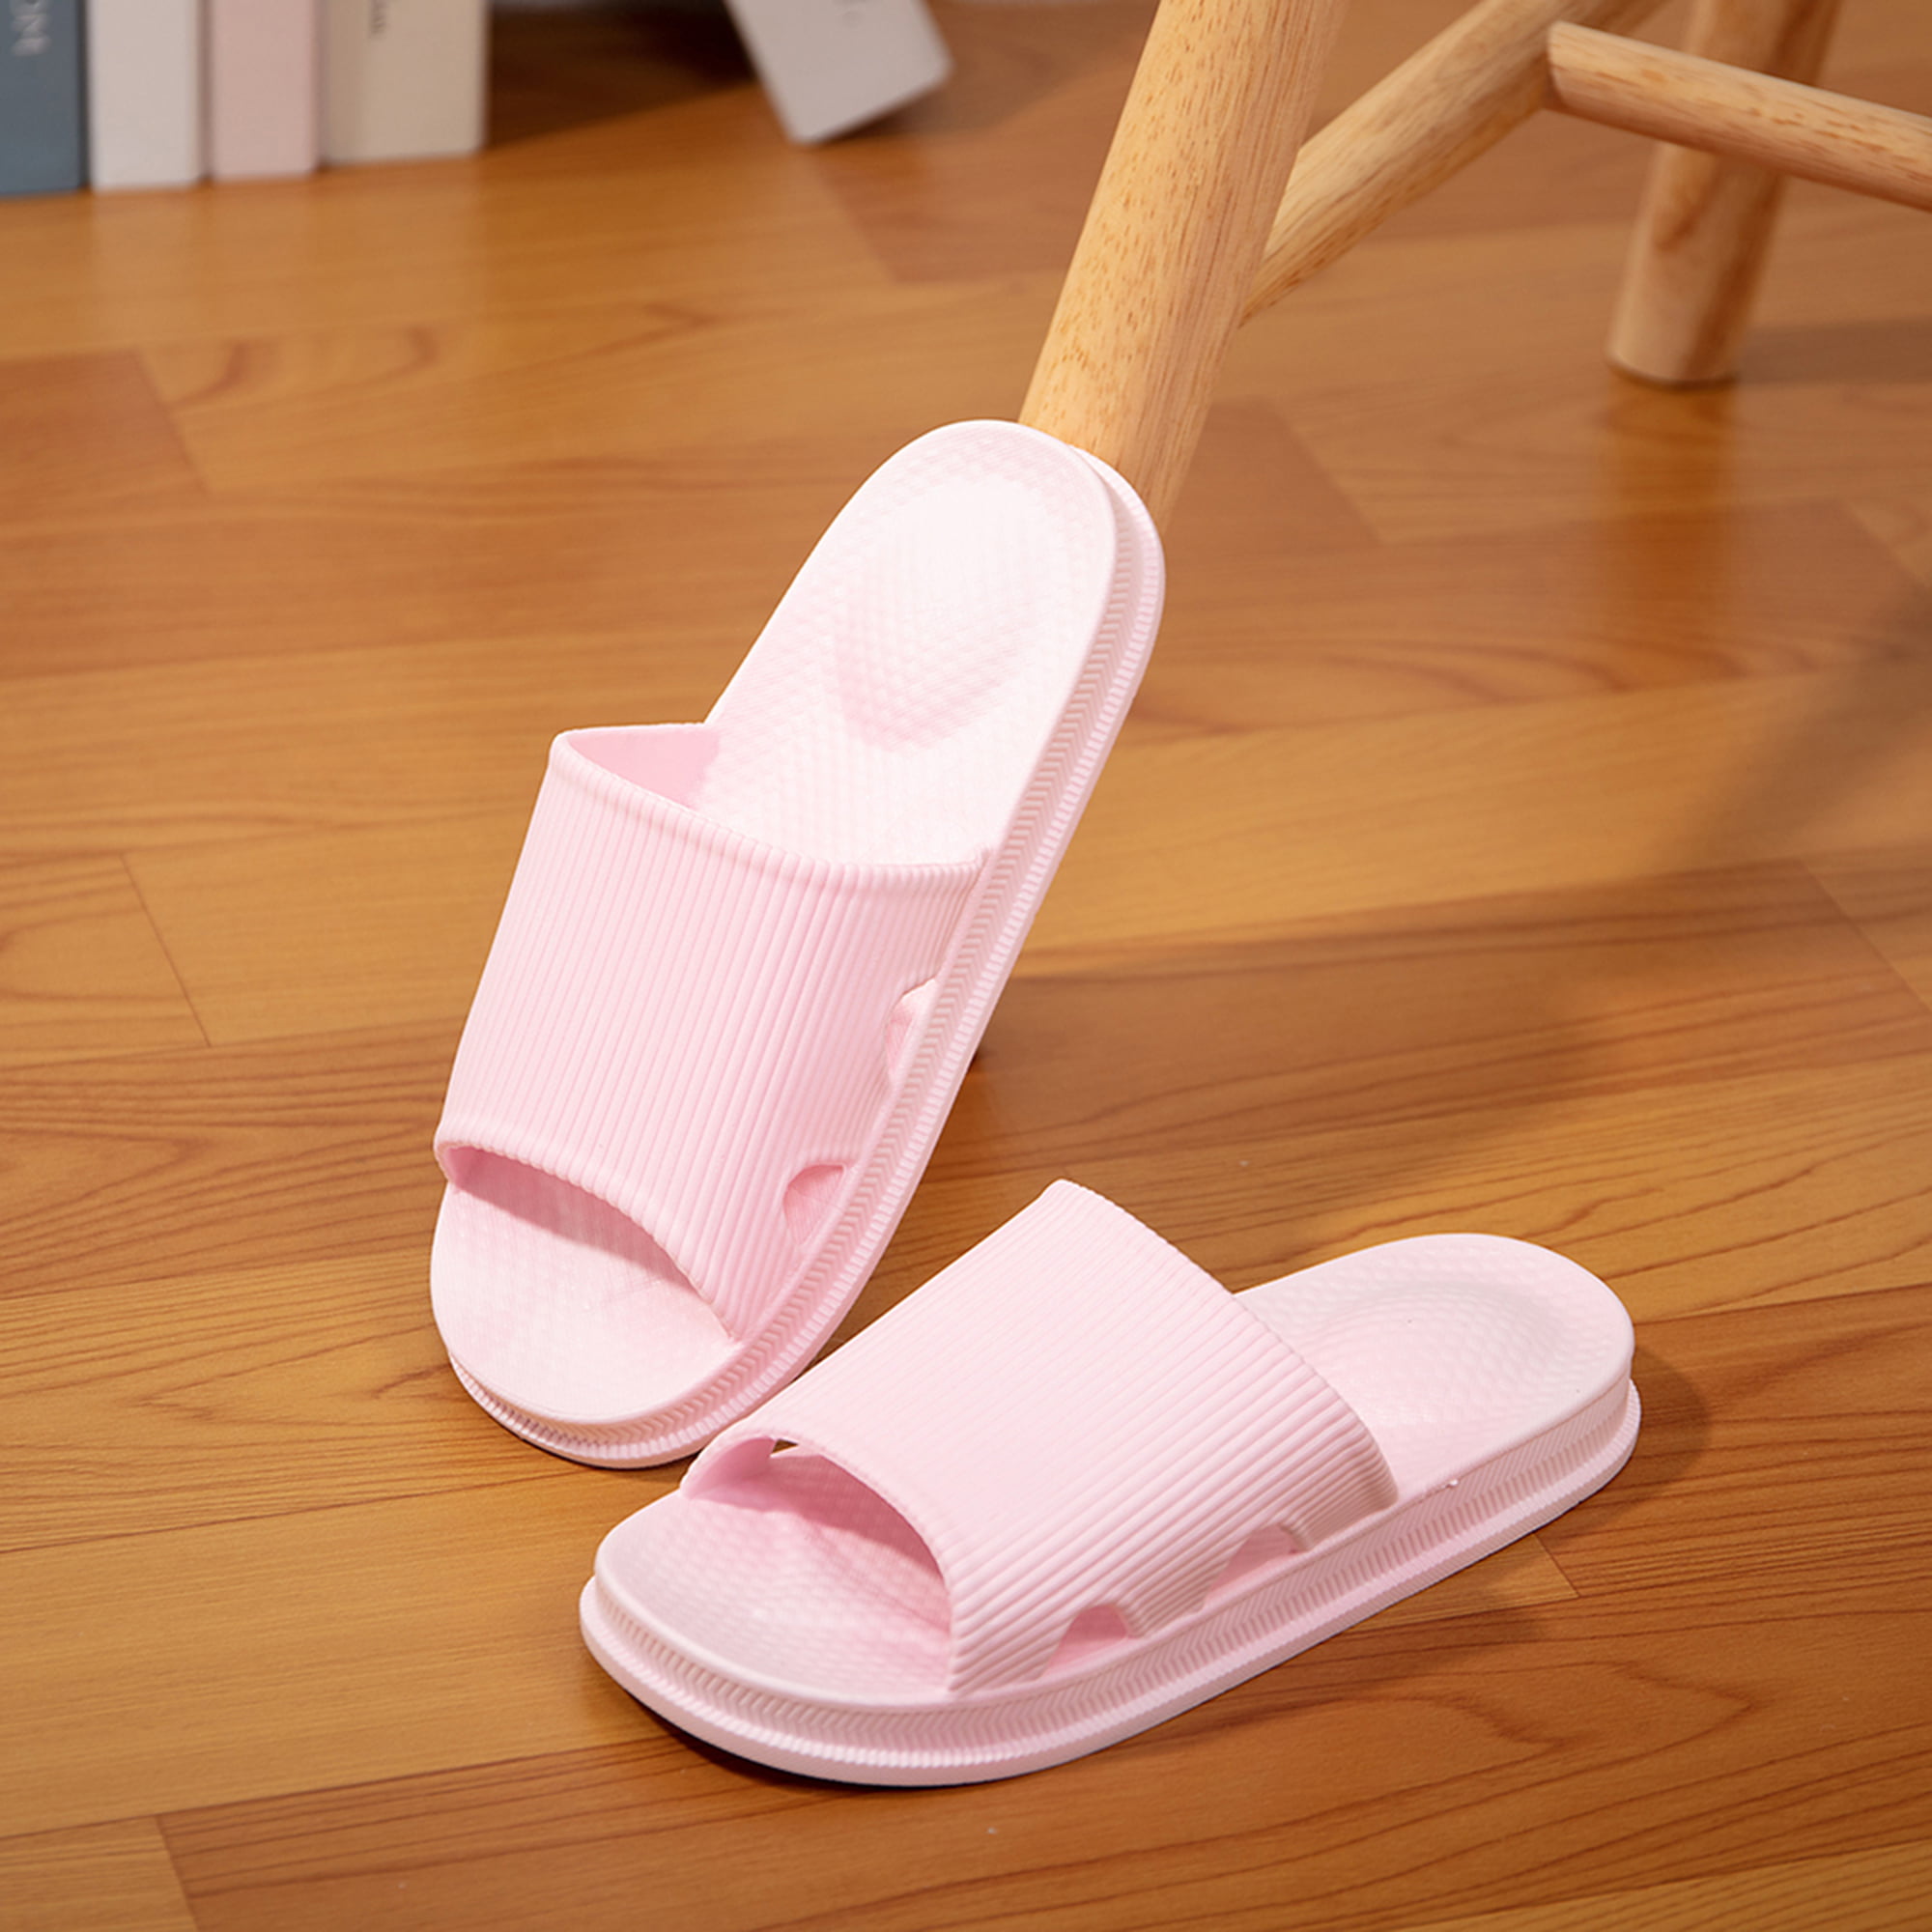 Crazy Lady Woman’s Man’s House Indoor & Outdoor Slippers Anti-Slip Massage Shower Spa Bath Pool Gym Slides Flip Flop Open Toe Comfortable Soft Sandals Casual Shoes Light Weight EVA Platform